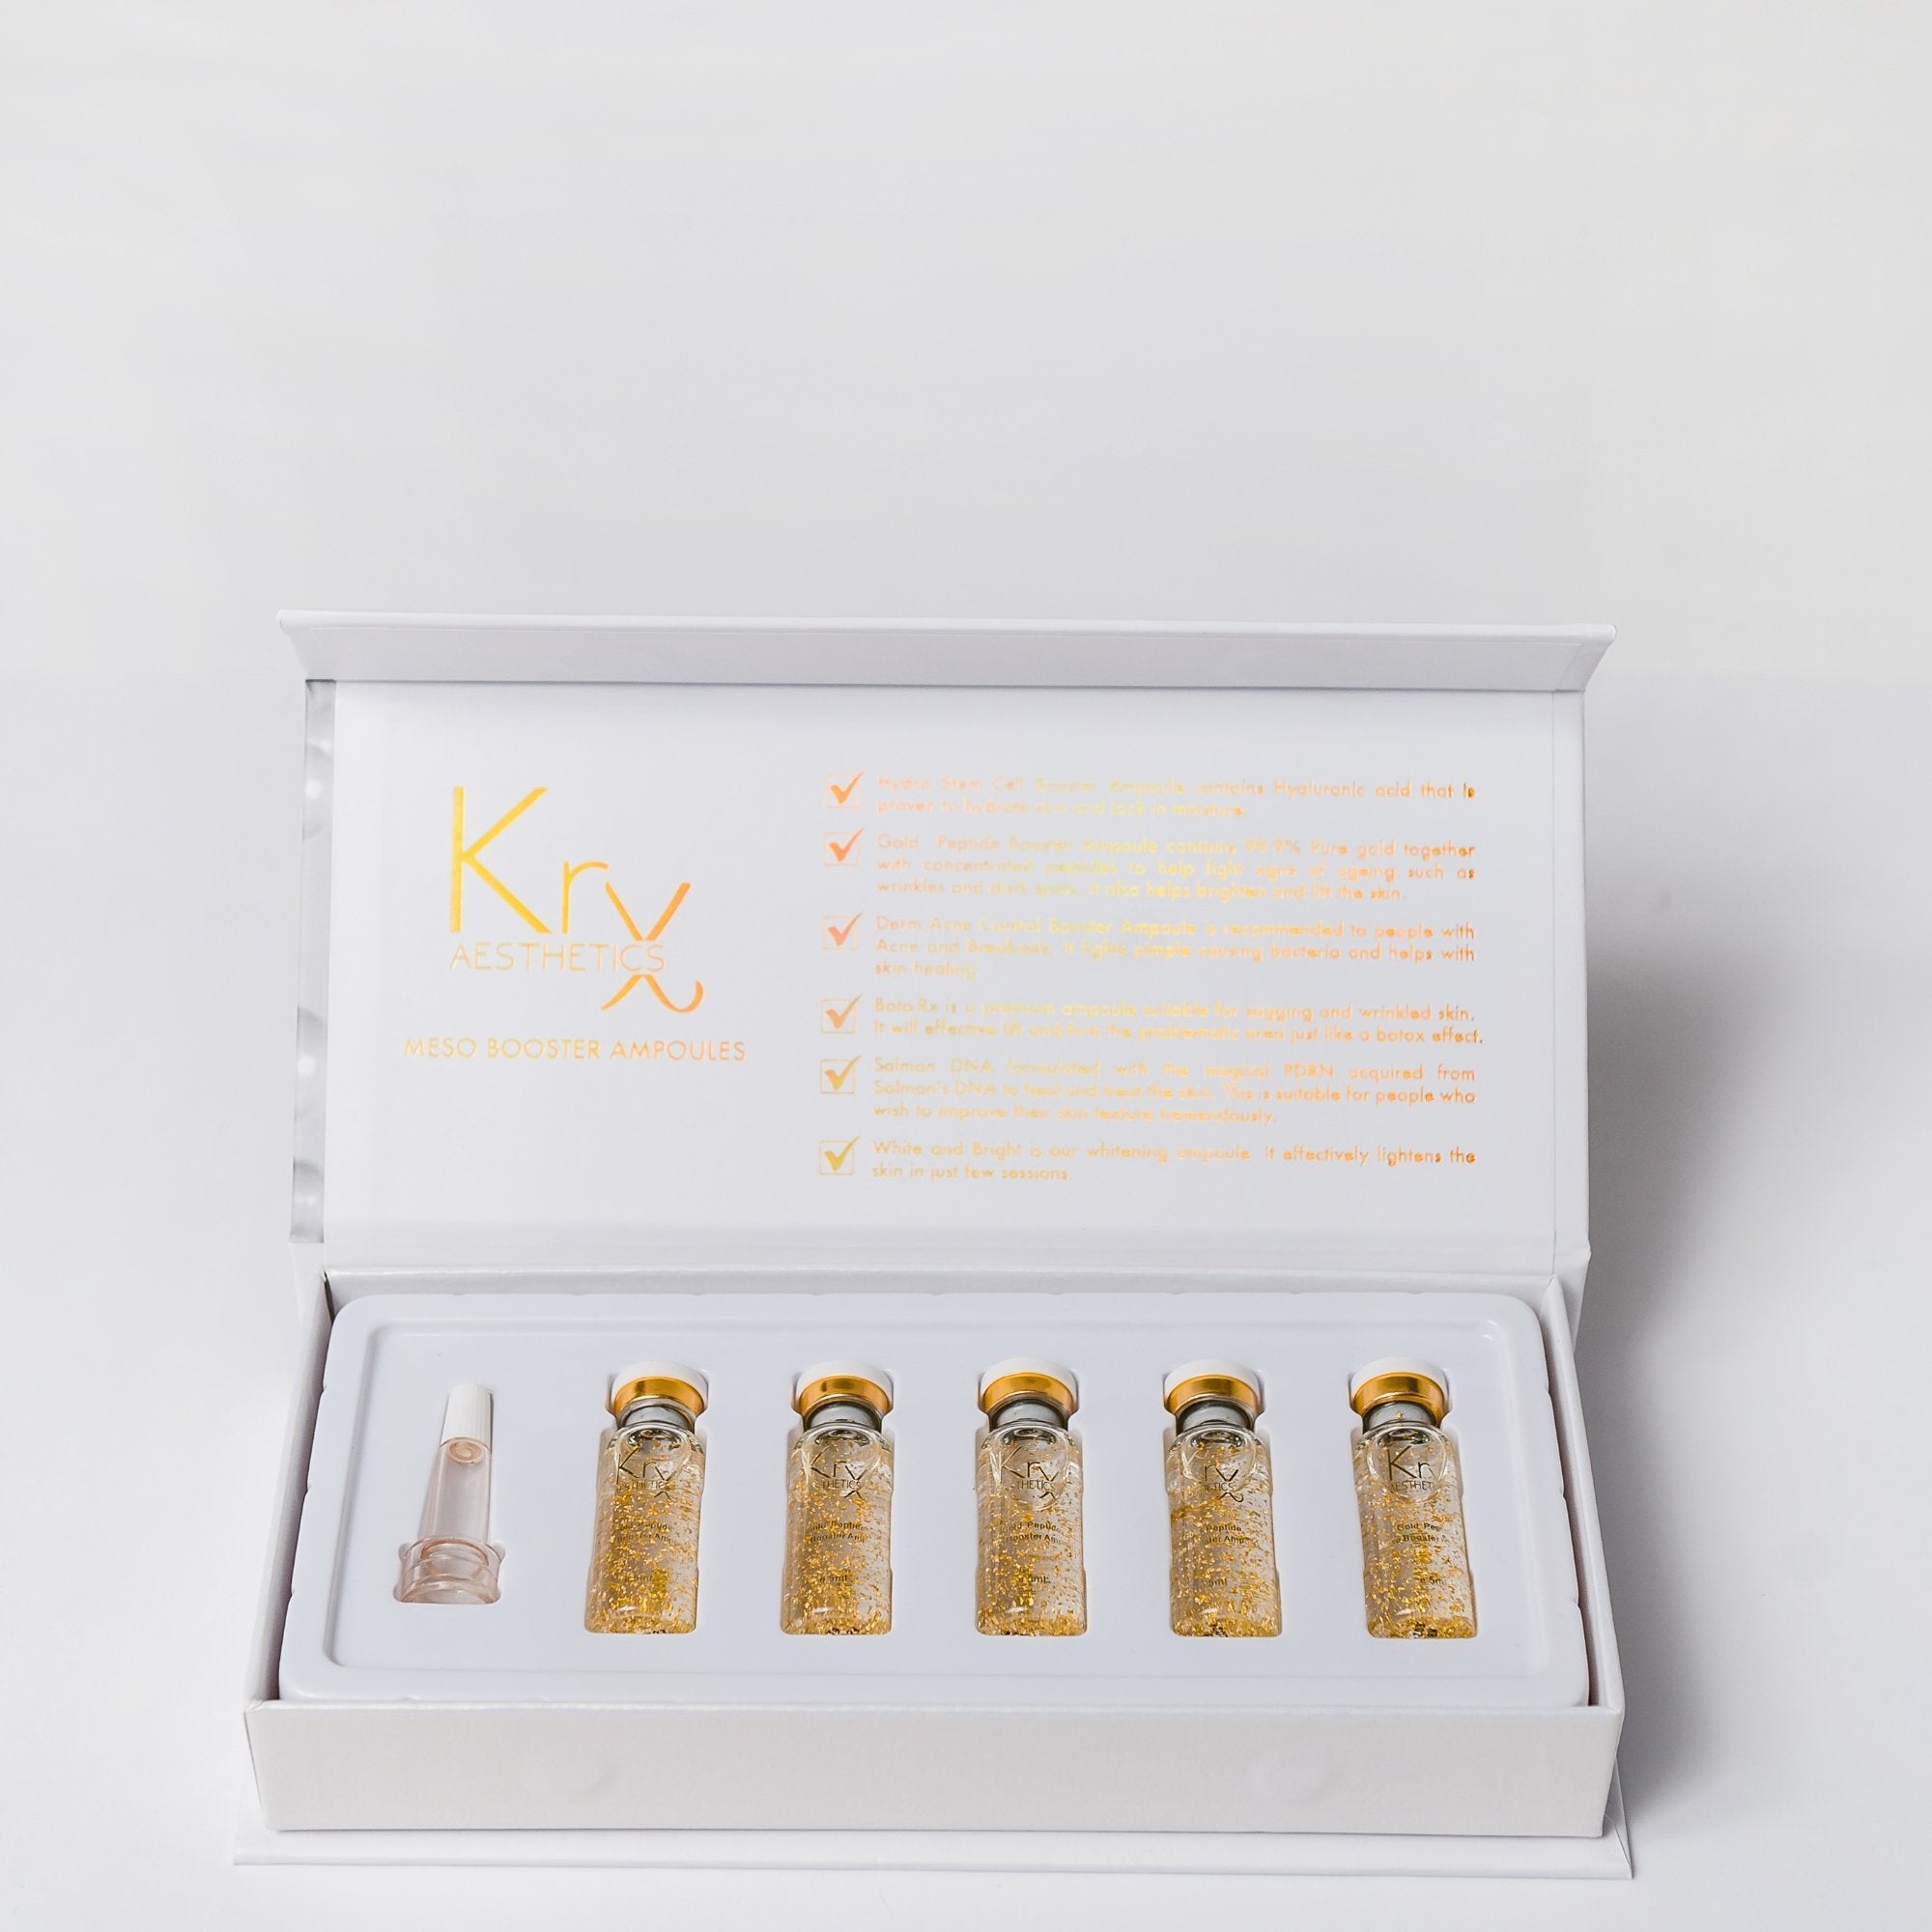 KrX Gold Peptide Booster Ampoule - by Kin Aesthetics 